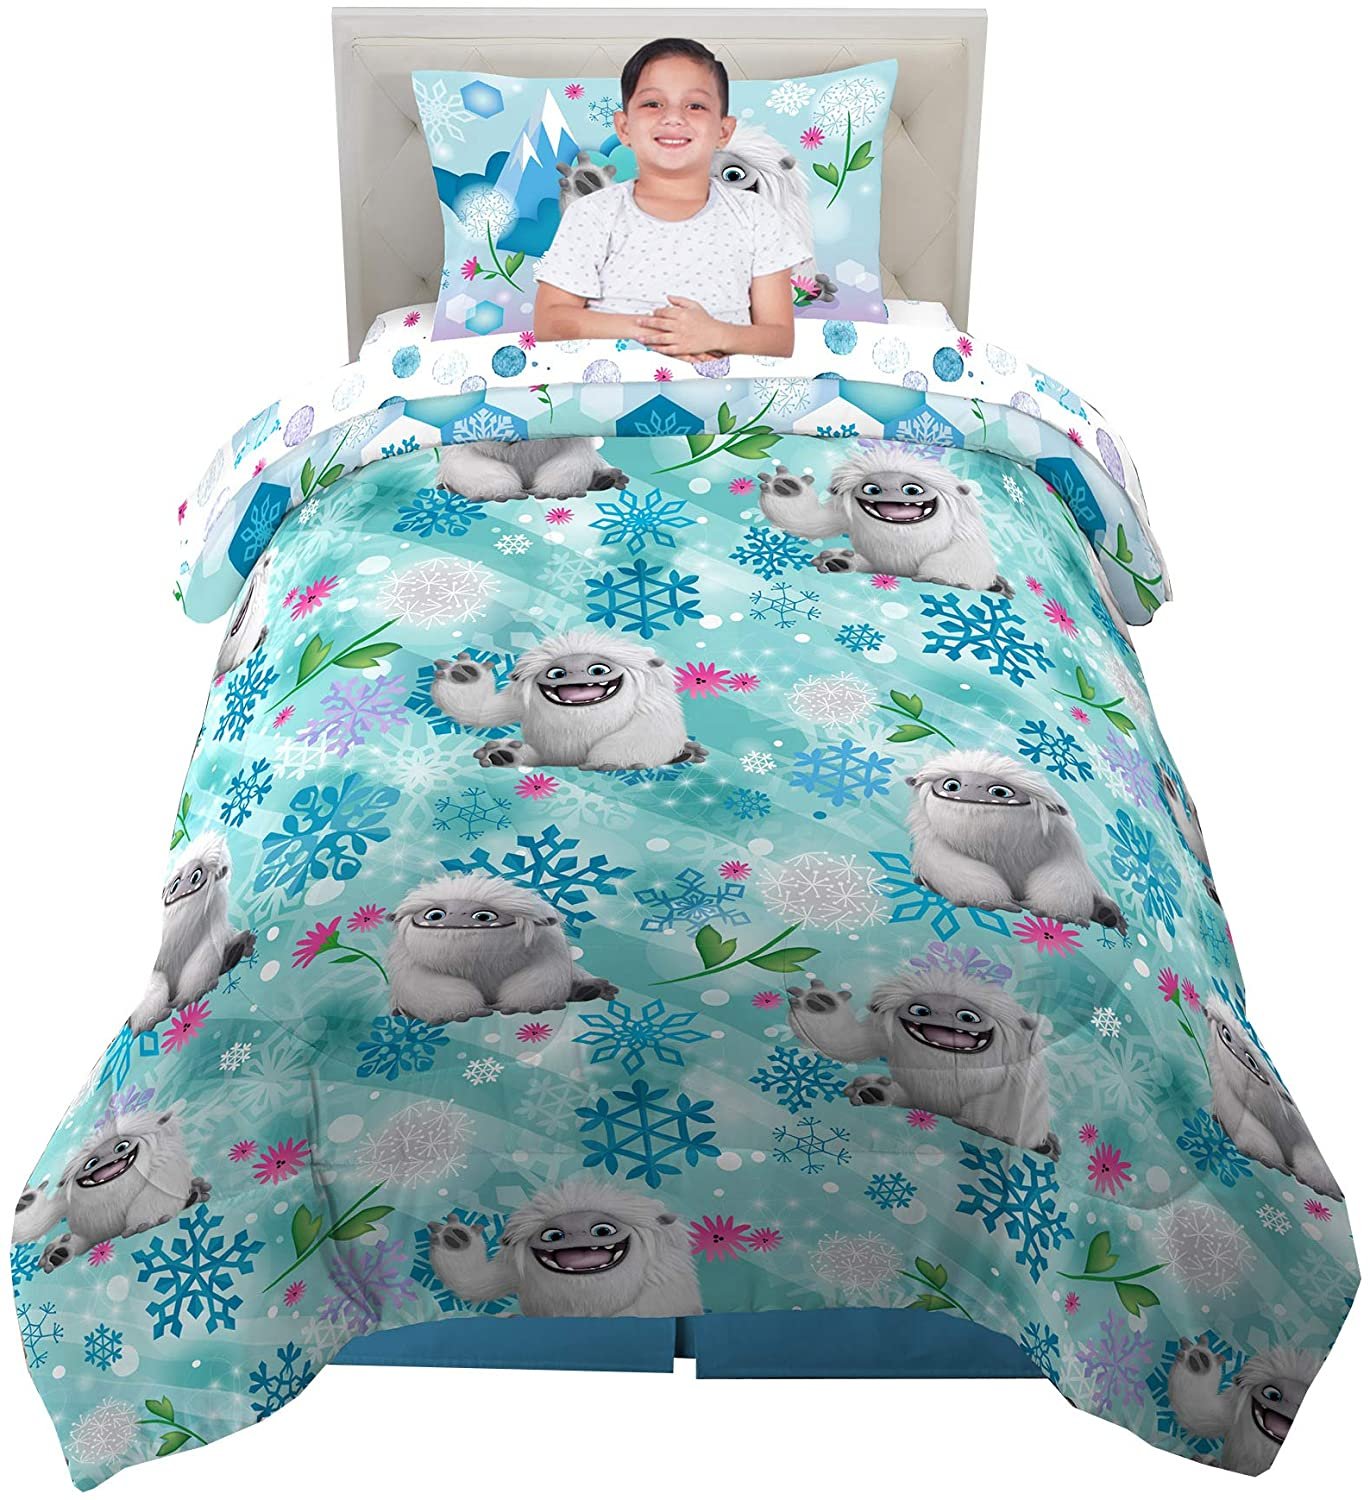 Franco Kids Bedding Comforter and Sheet Set, 4 Piece Twin Size, Abominable - image 1 of 9